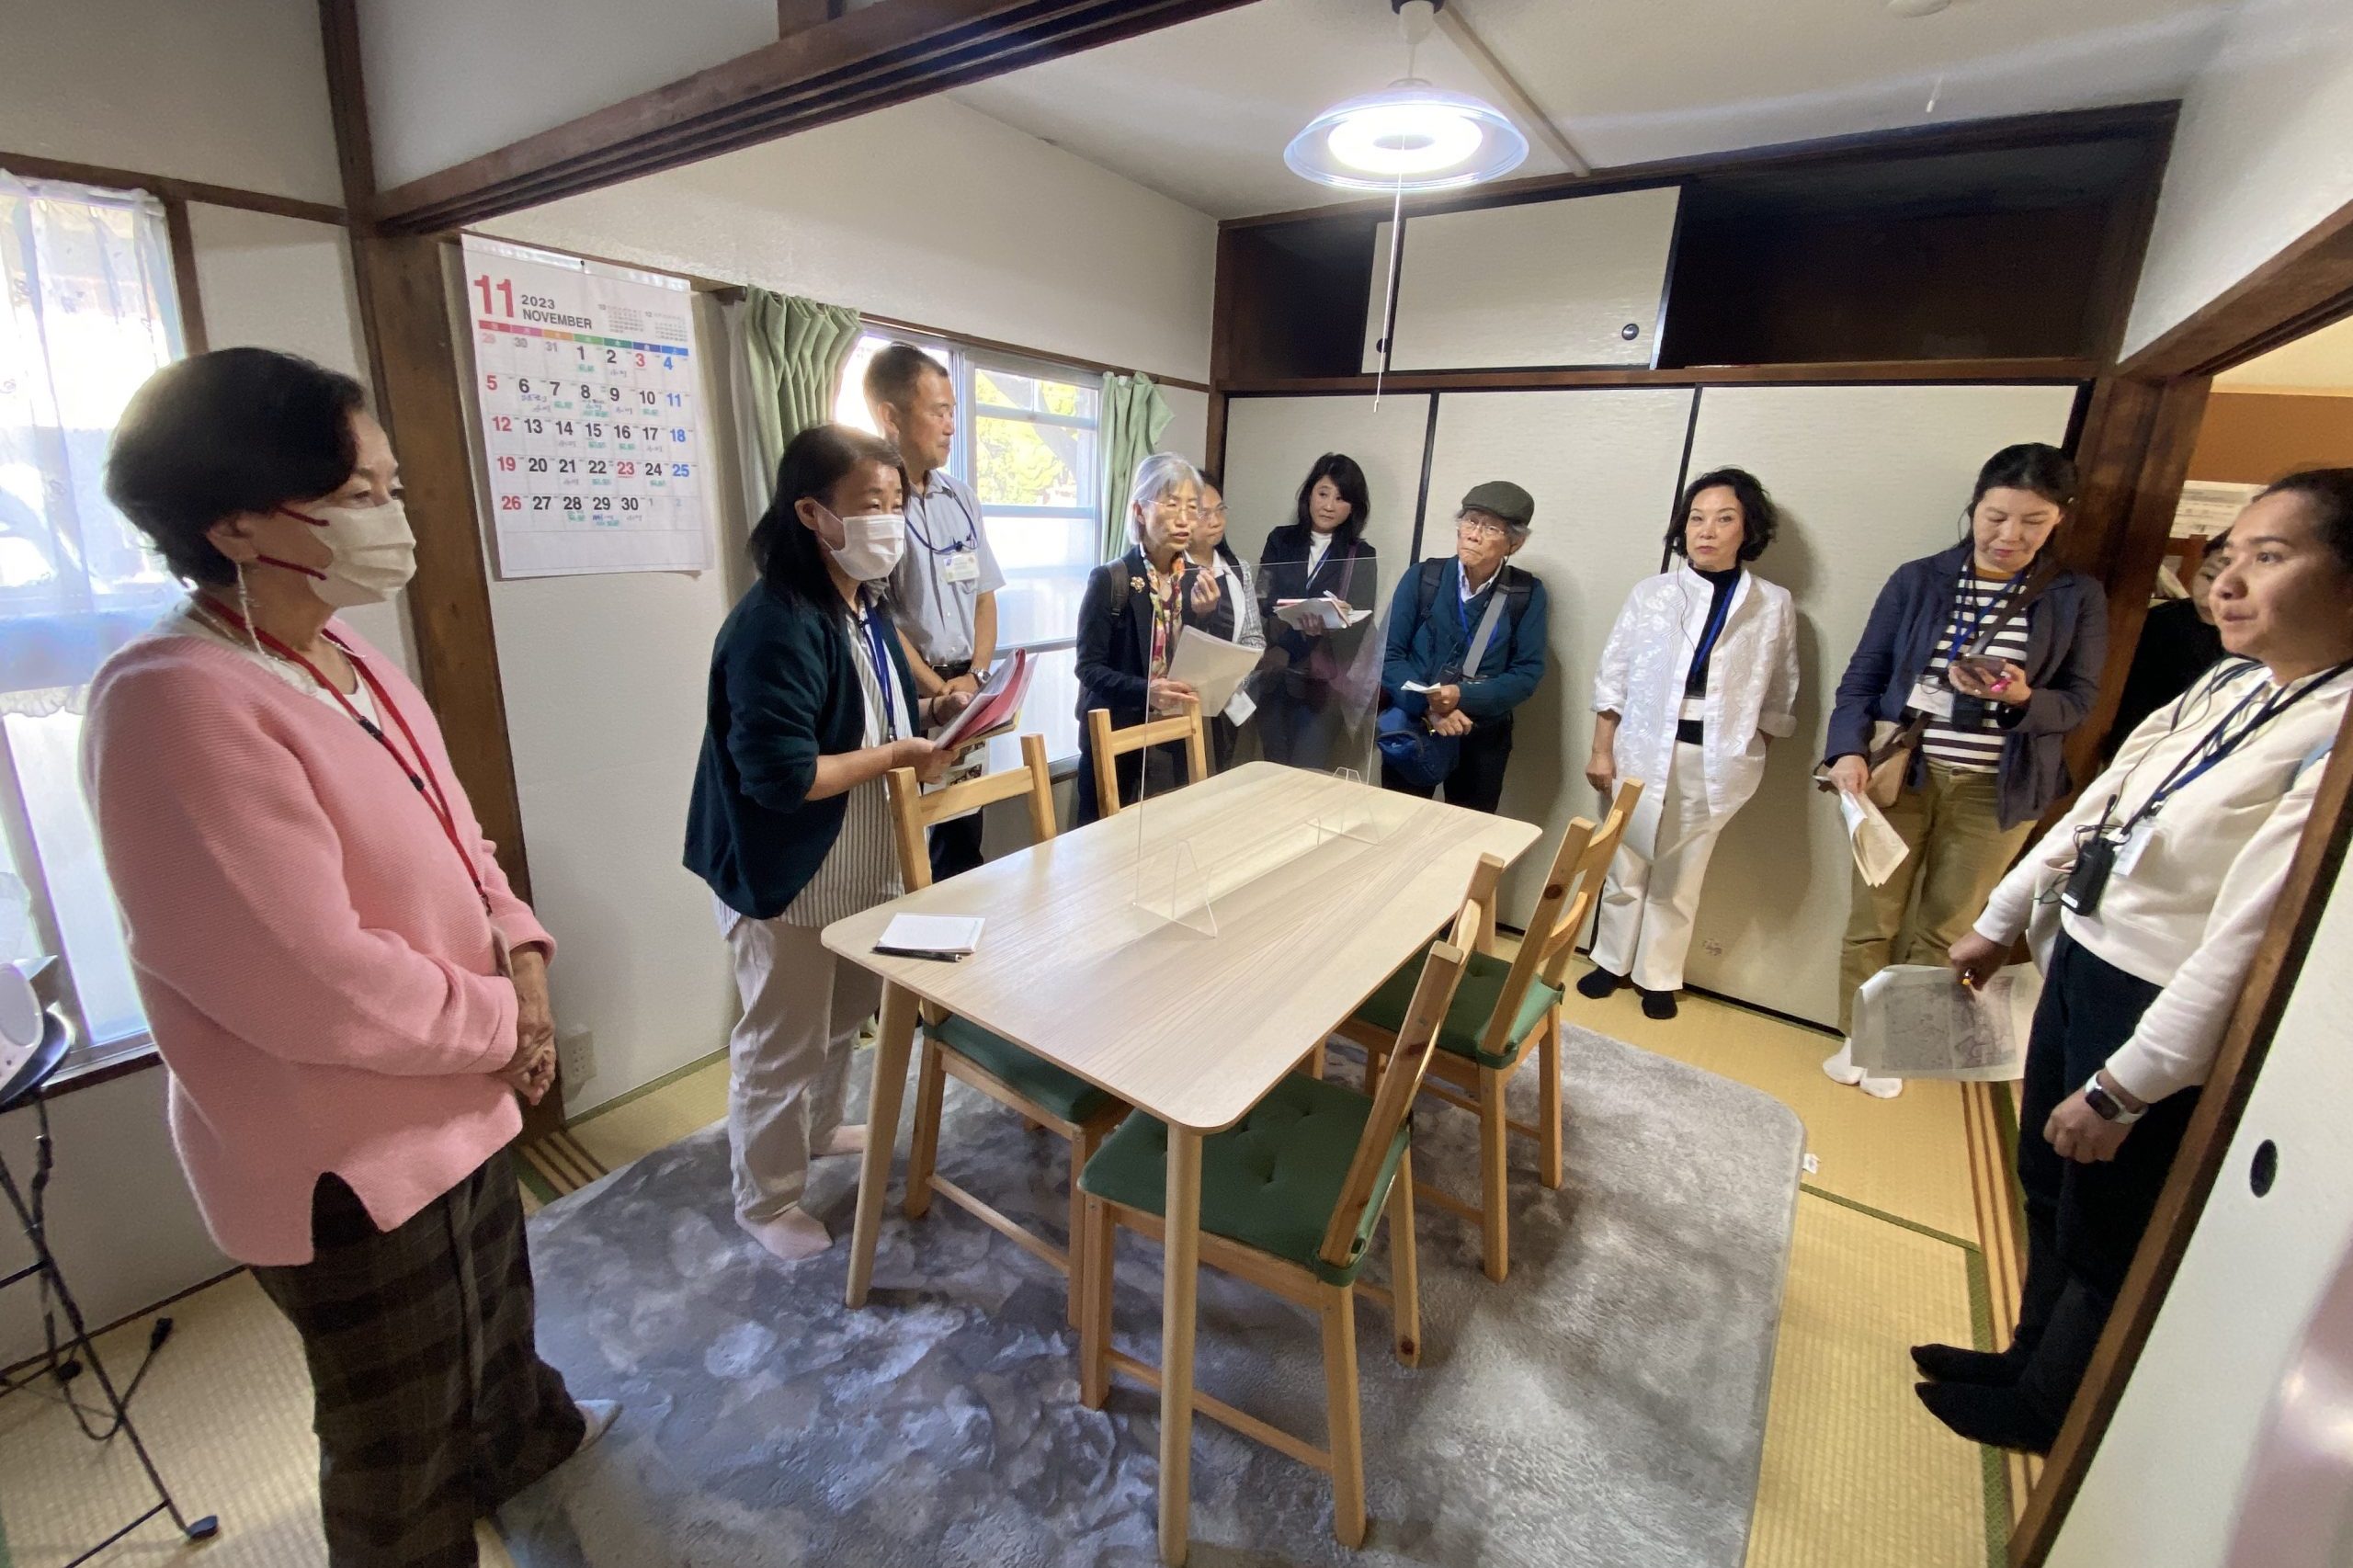 Learning about the consultation room for the residents at Sasayama